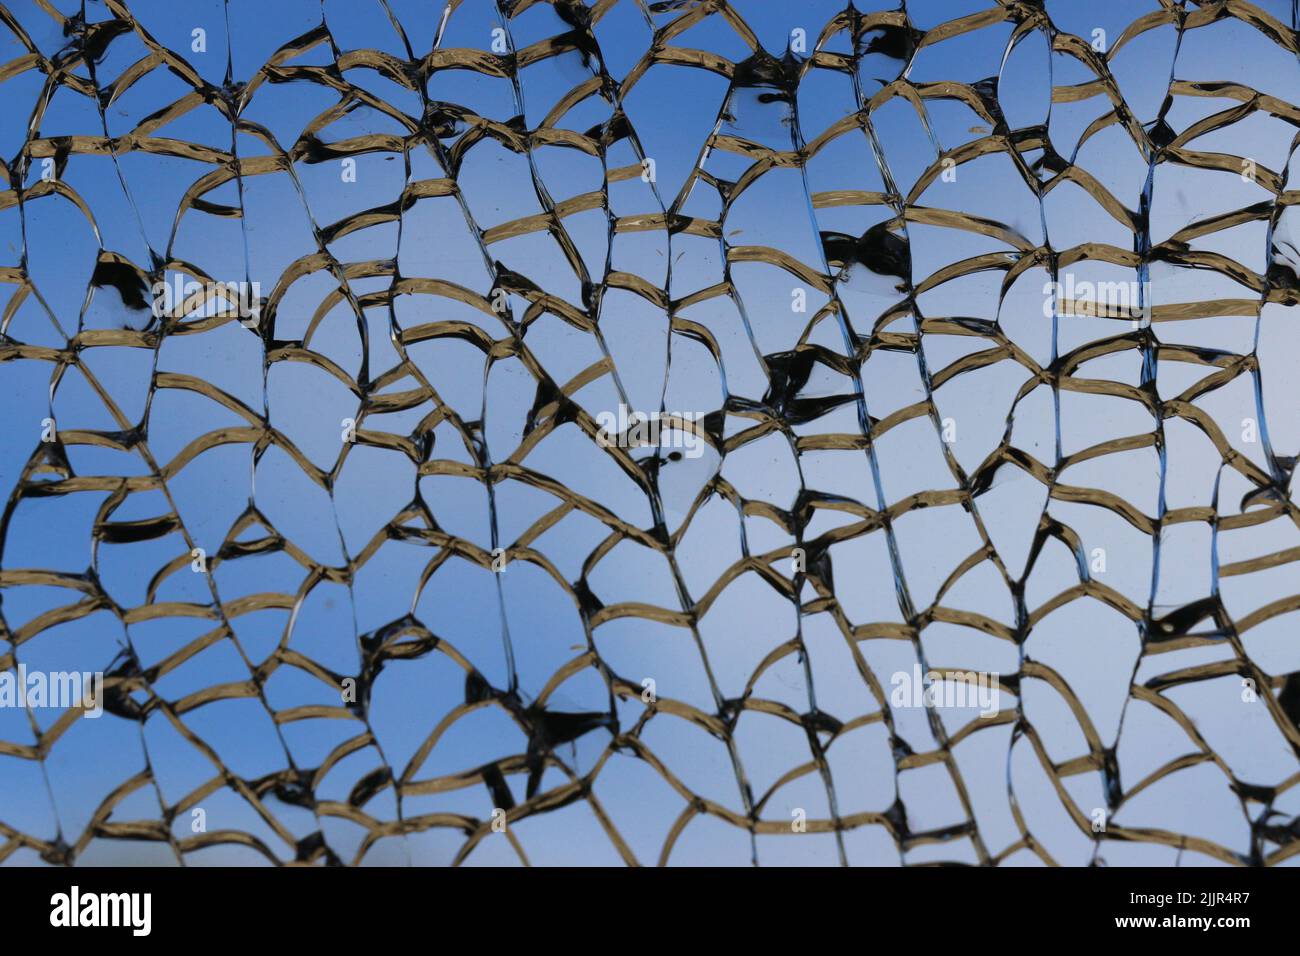 Beautiful silver lines of a shattered window create an intricate pattern against a deep blue sky. Stock Photo